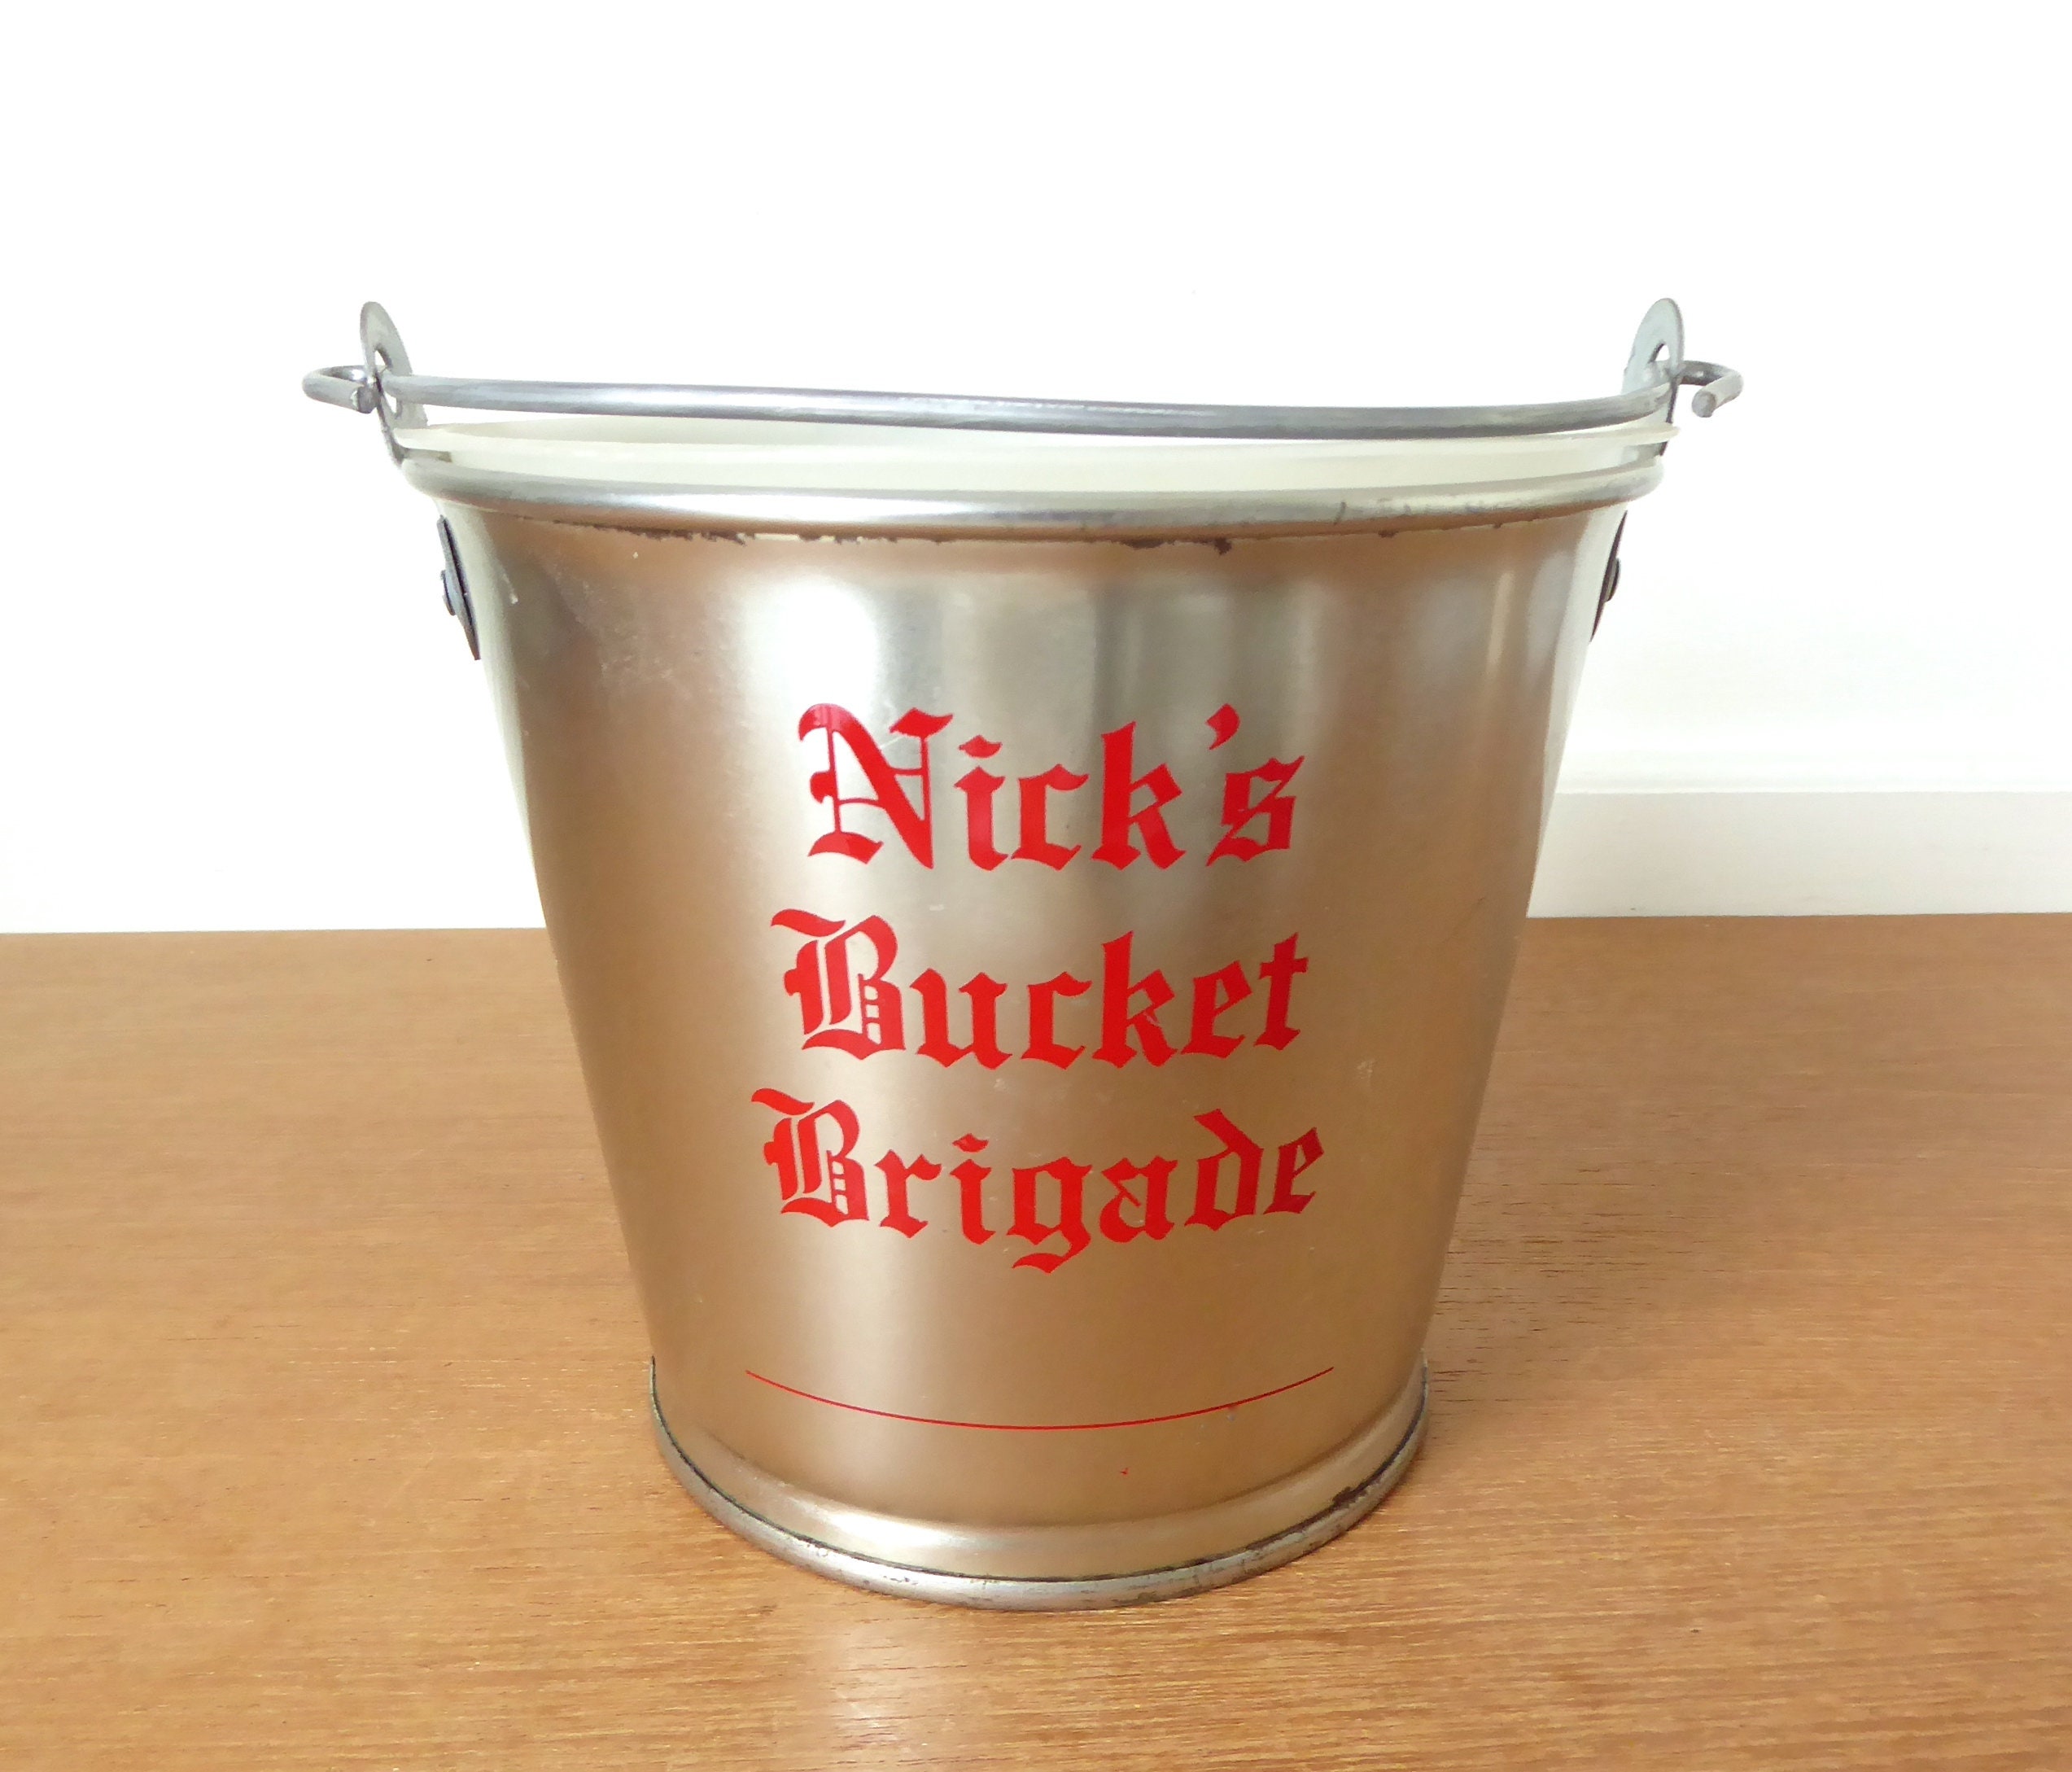 Father's Day Deluxe Beer-B-Q Bucket